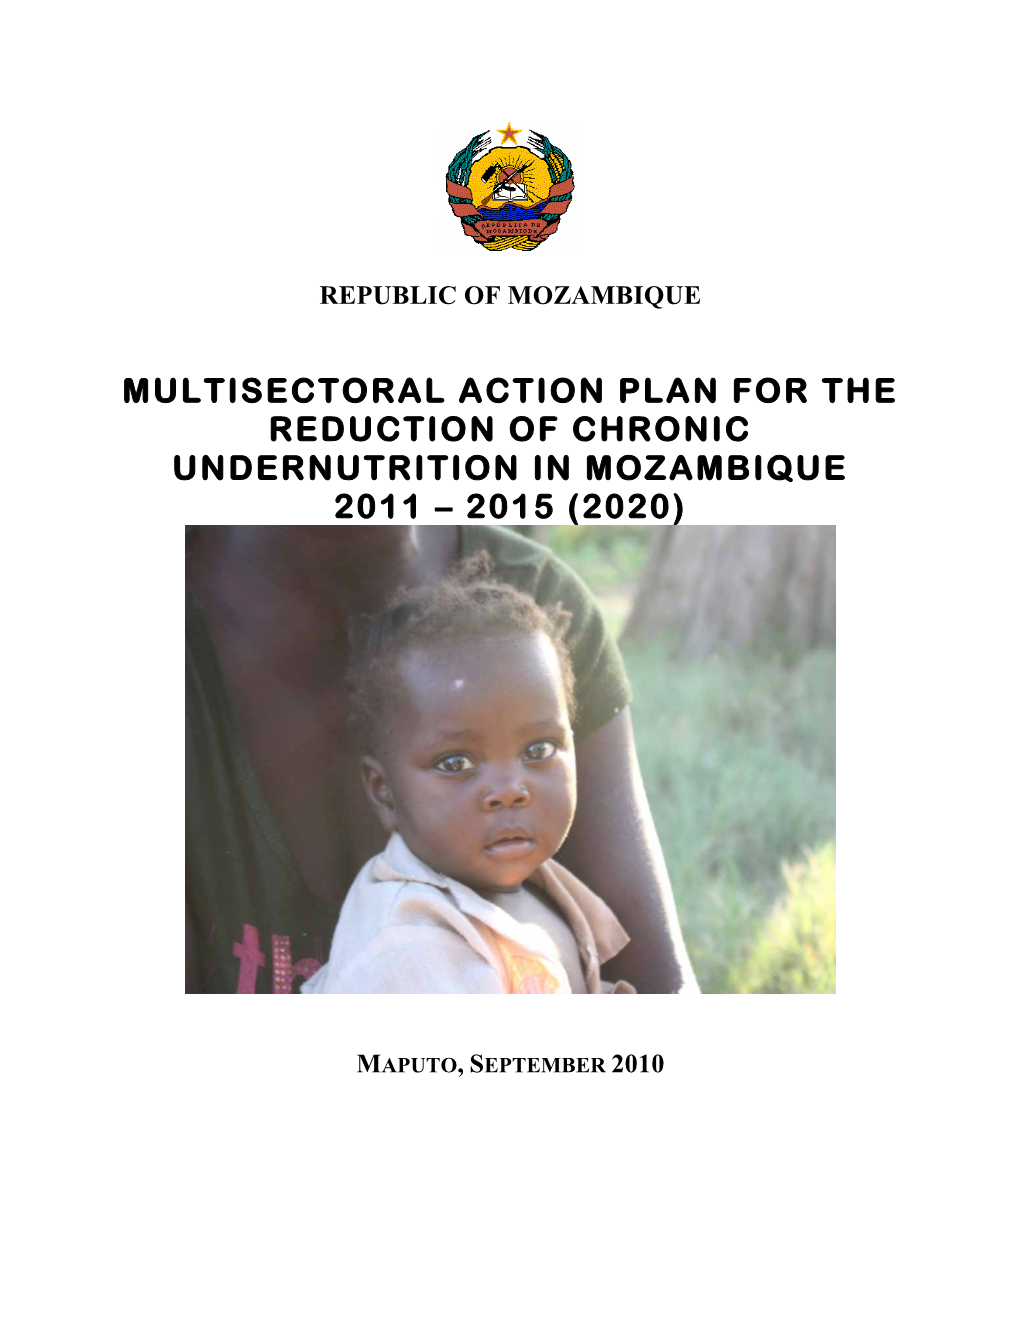 Multisectoral Action Plan for the Reduction of Chronic Undernutrition in Mozambique 2011 – 2015 (2020)